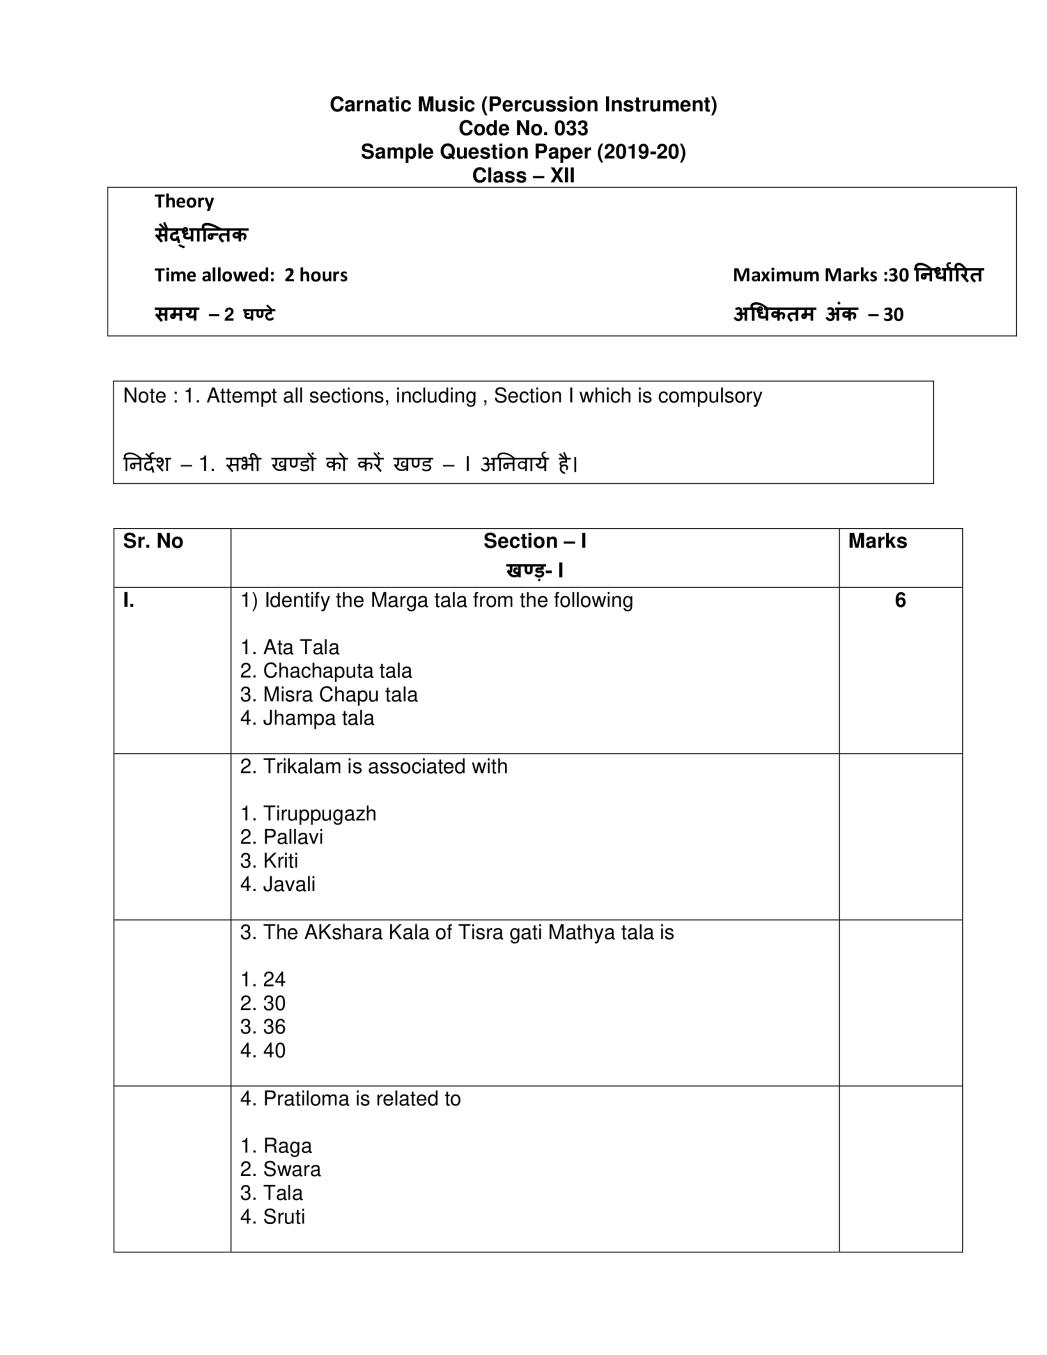 CBSE Class 12 Sample Paper for Carnatic Music (Percussion Instrument) - Page 1